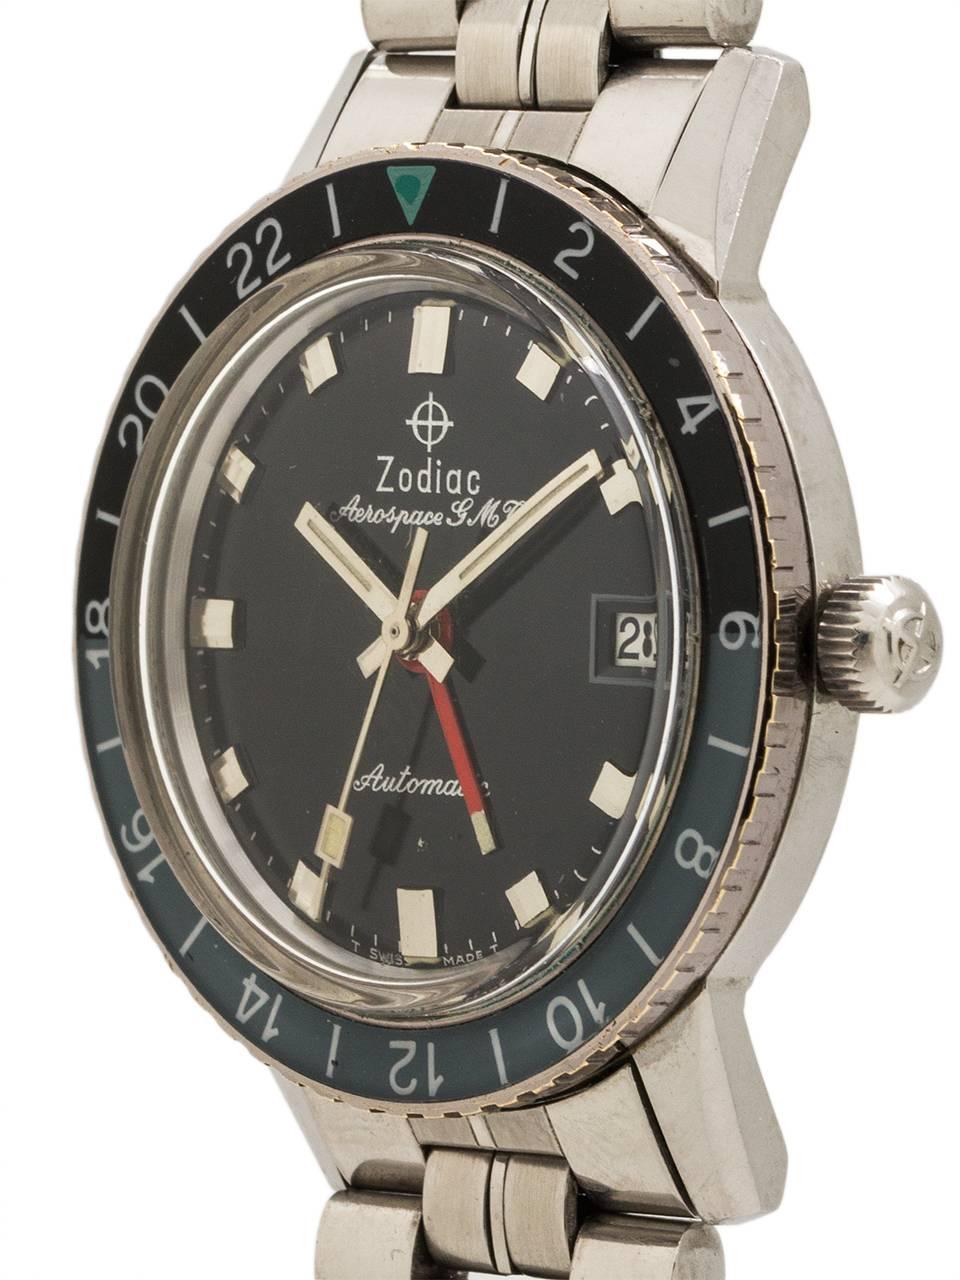 Zodiac Stainless Steel Aerospace GMT automatic circa 1960’s. 36mm case with screw down case back, rotating 24 hour black and gray acrylic bezel with green triangle 24 hour index. Glossy black original dial with luminous hands and red 24 hour hand.